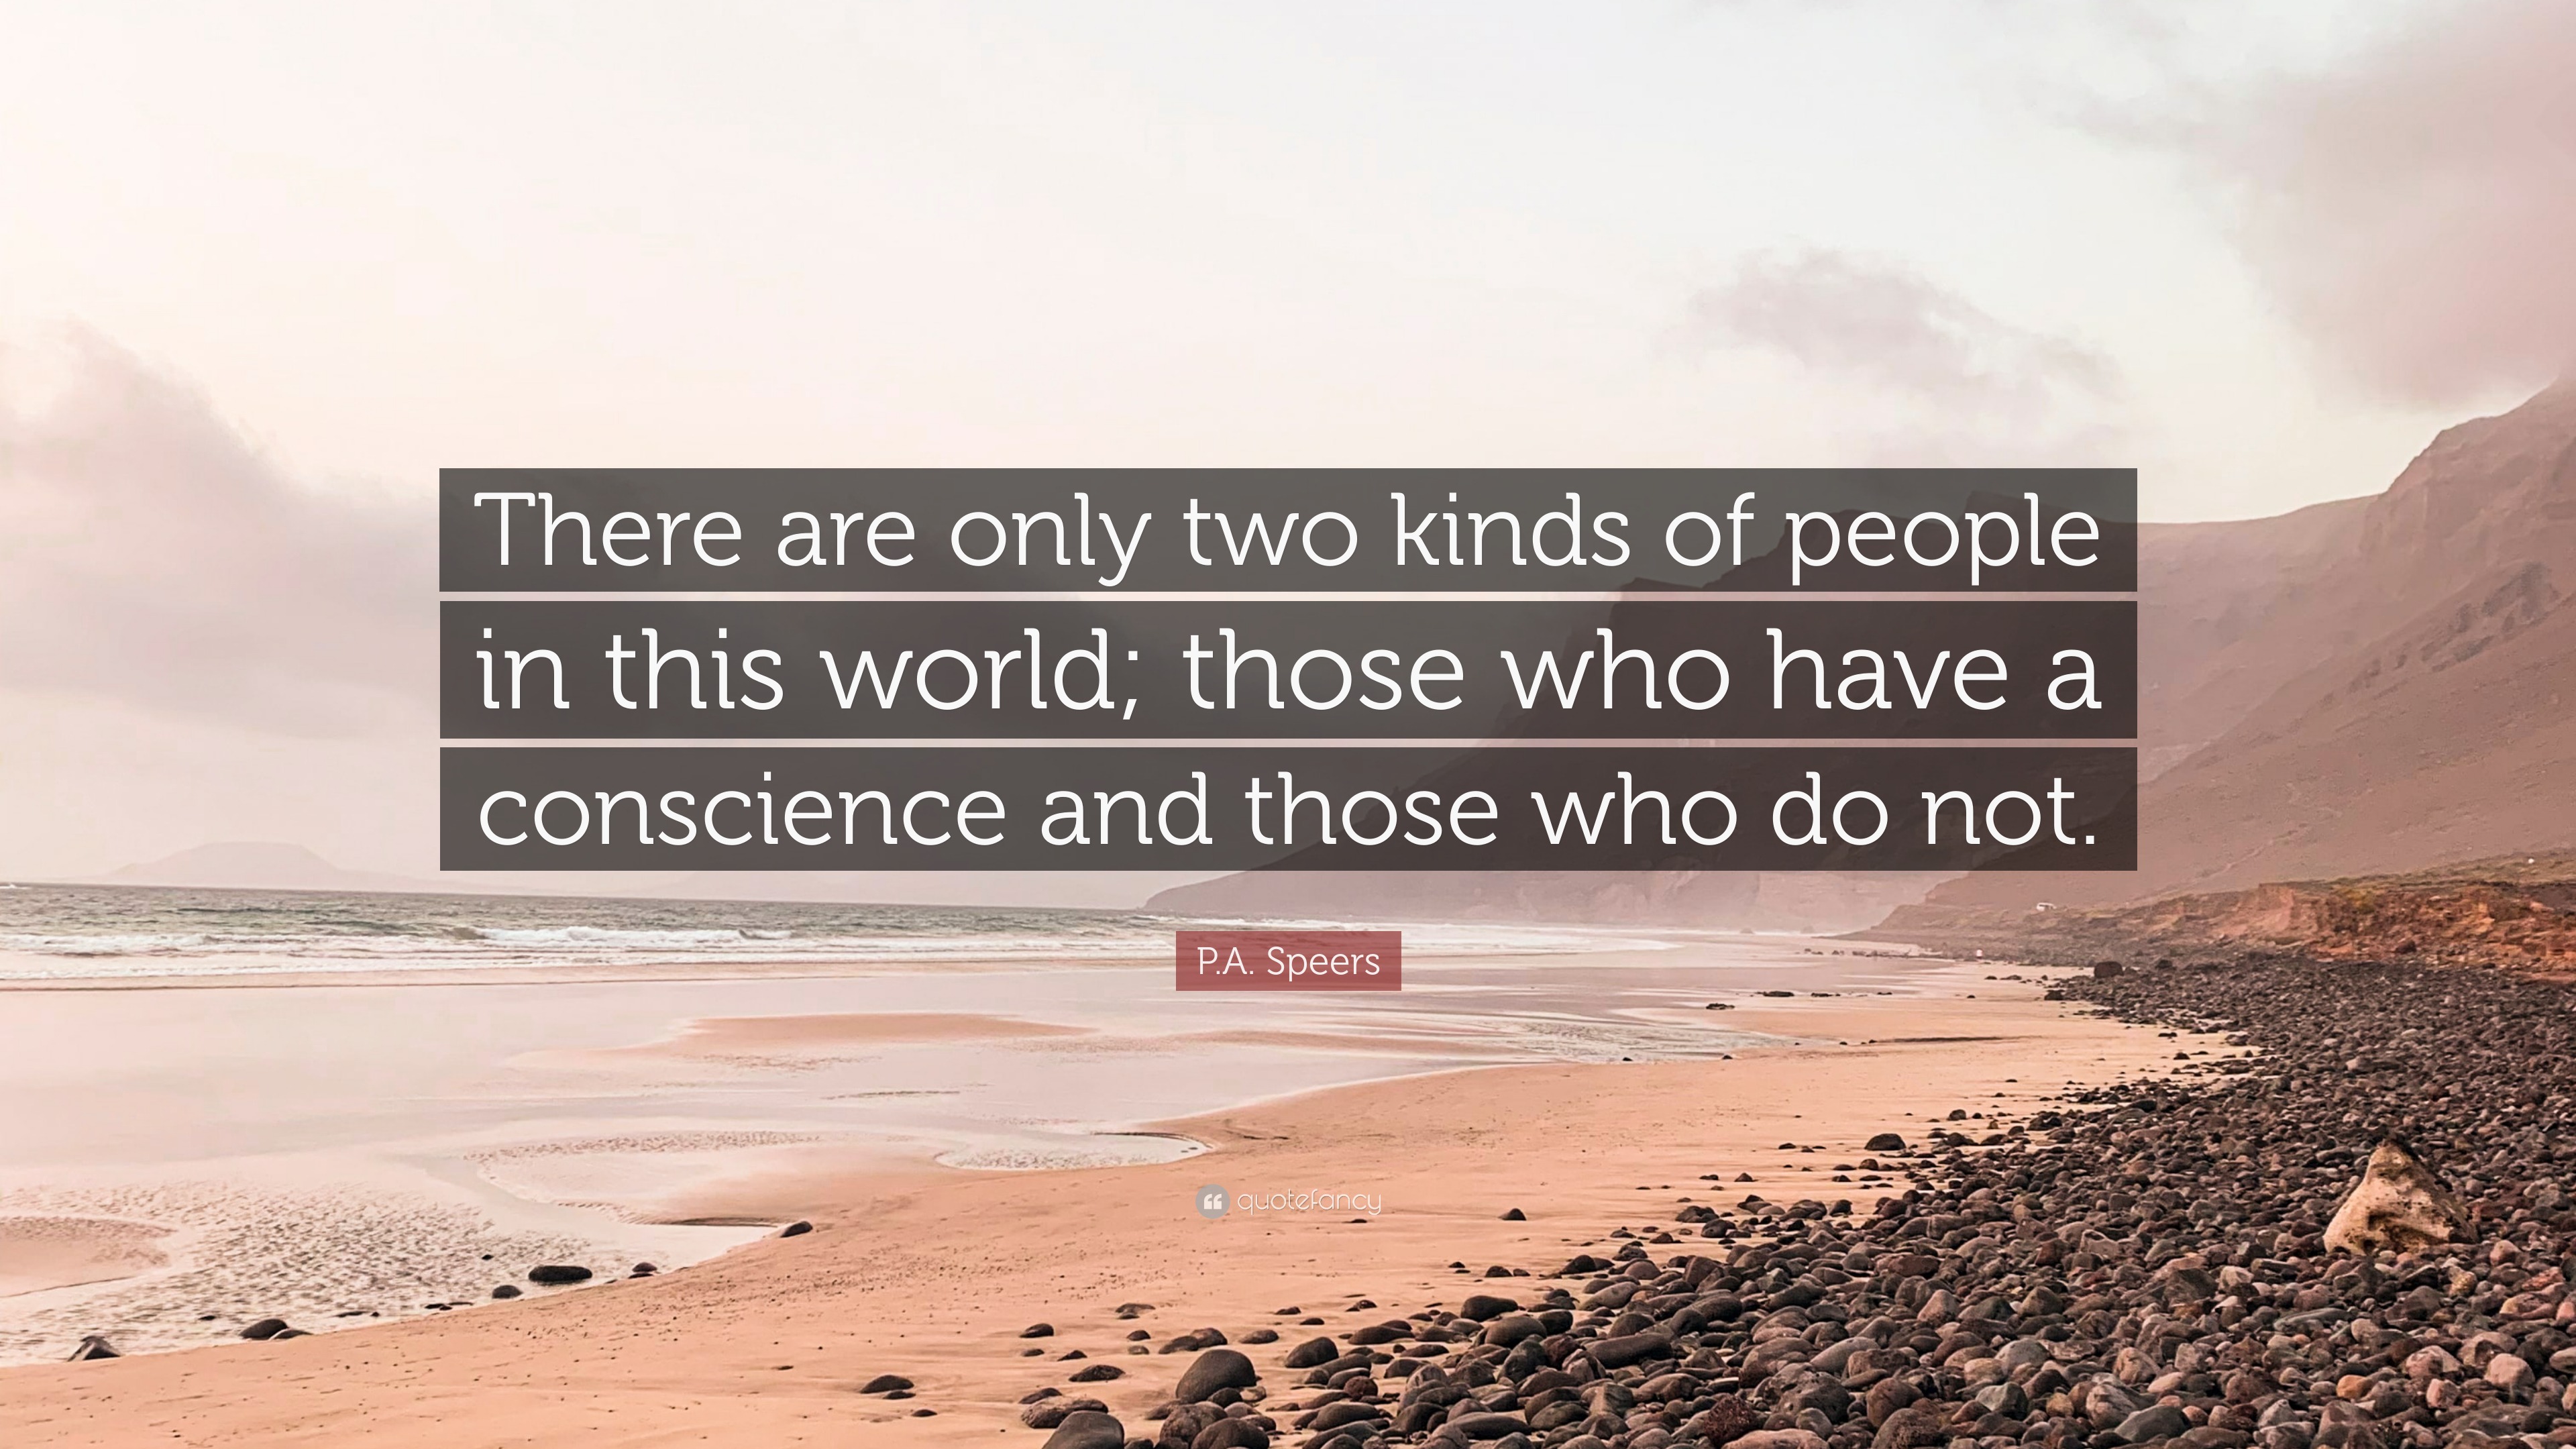 P.A. Speers Quote: “There are only two kinds of people in this world ...